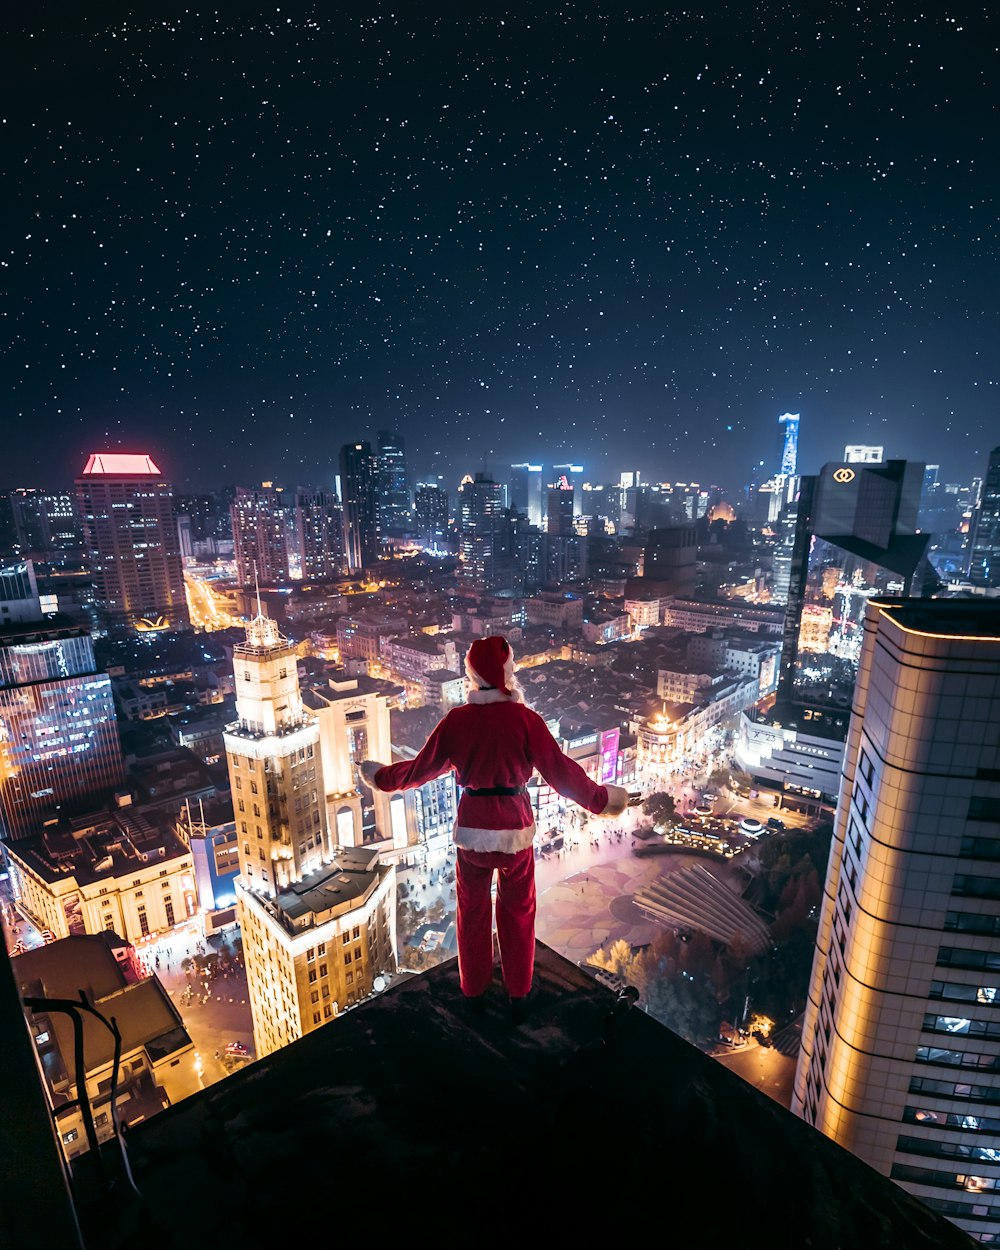 person wearing Santa Claus outfit standing on the edge of building at night time